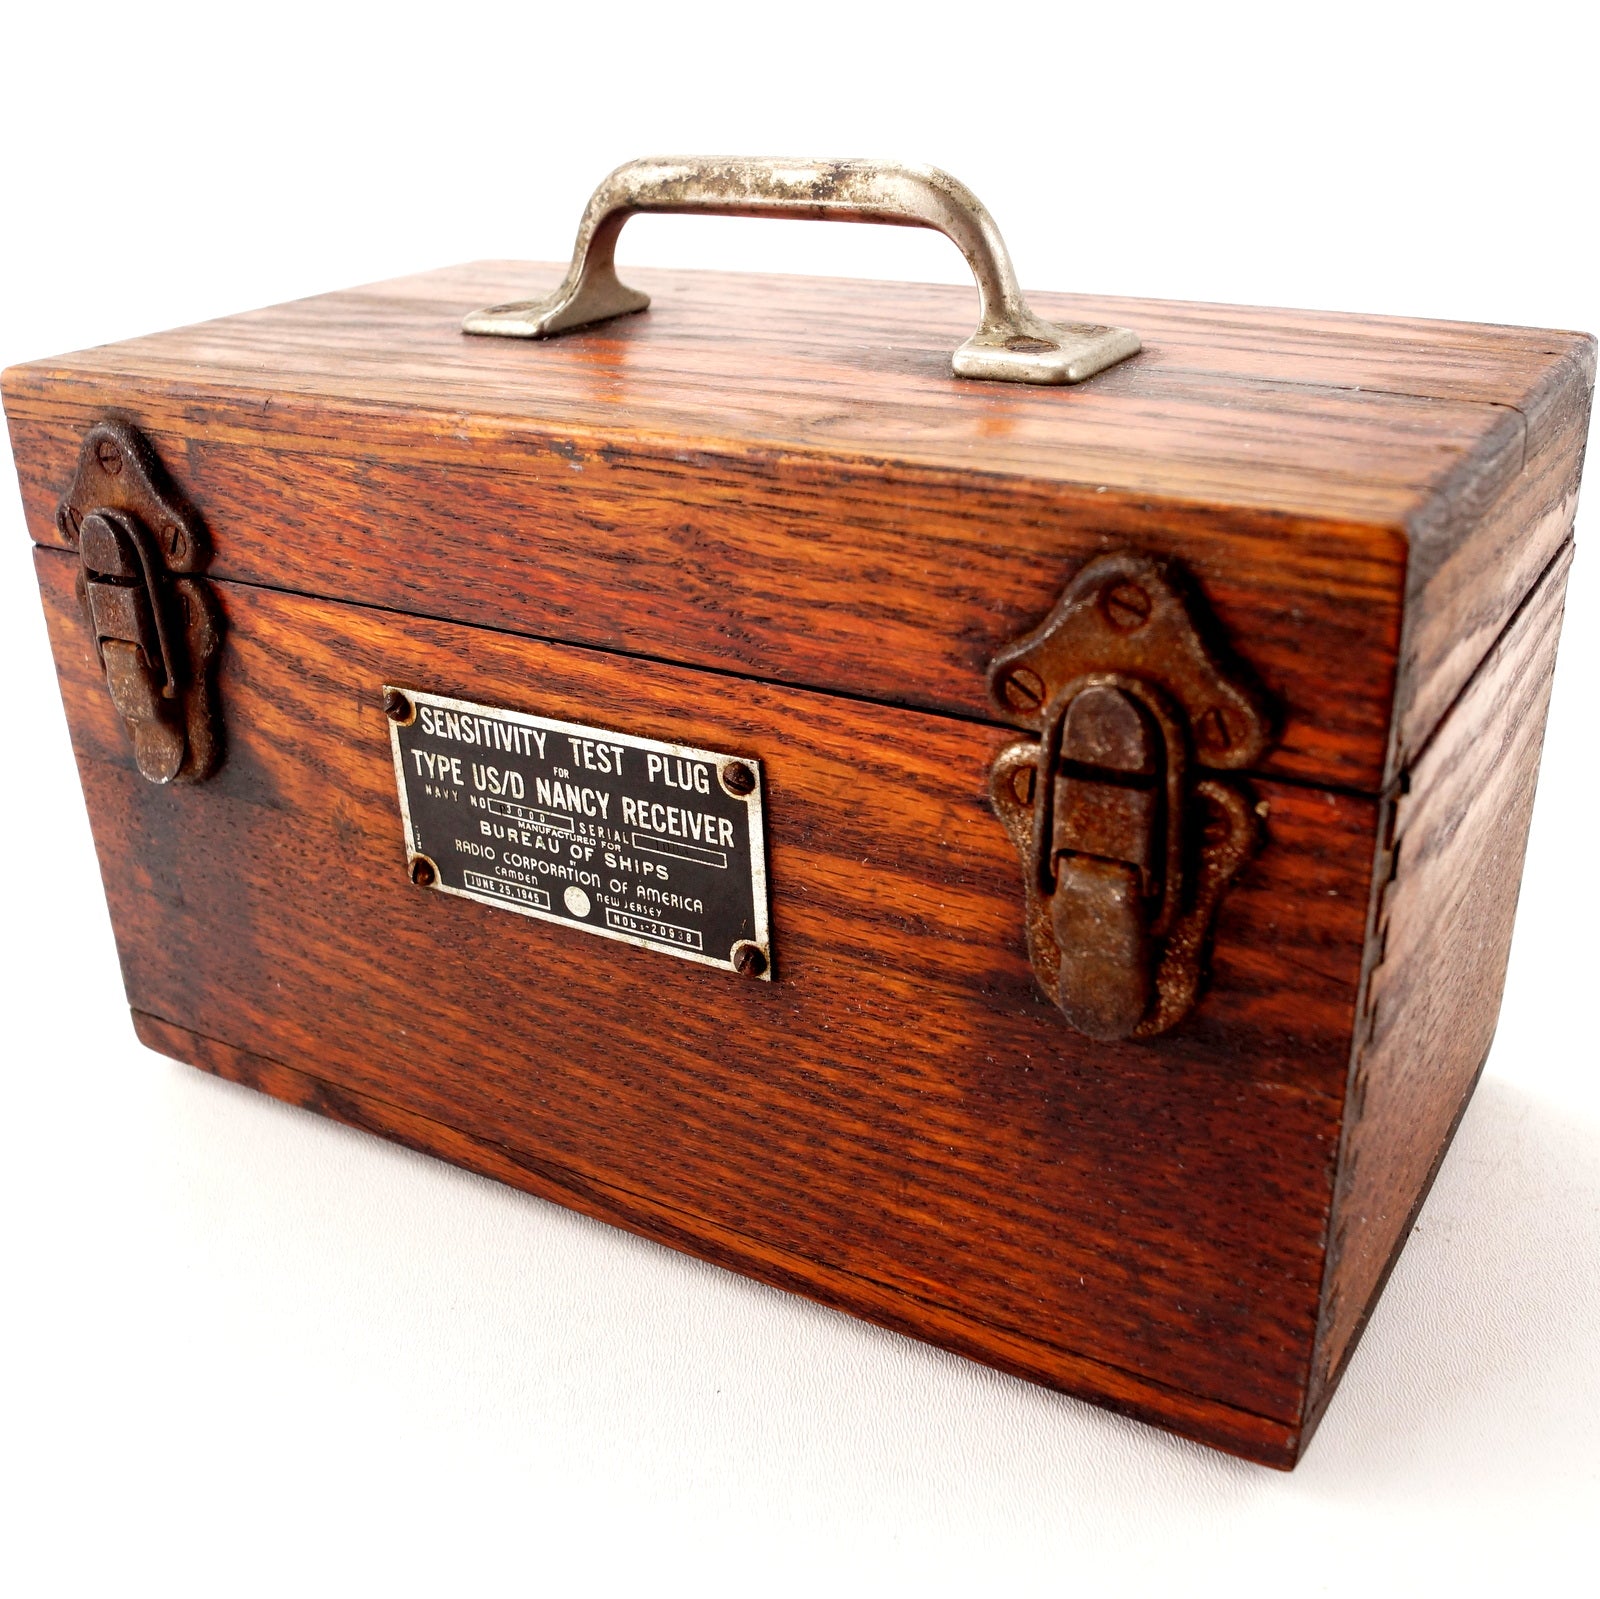 Vintage wooden box with lid